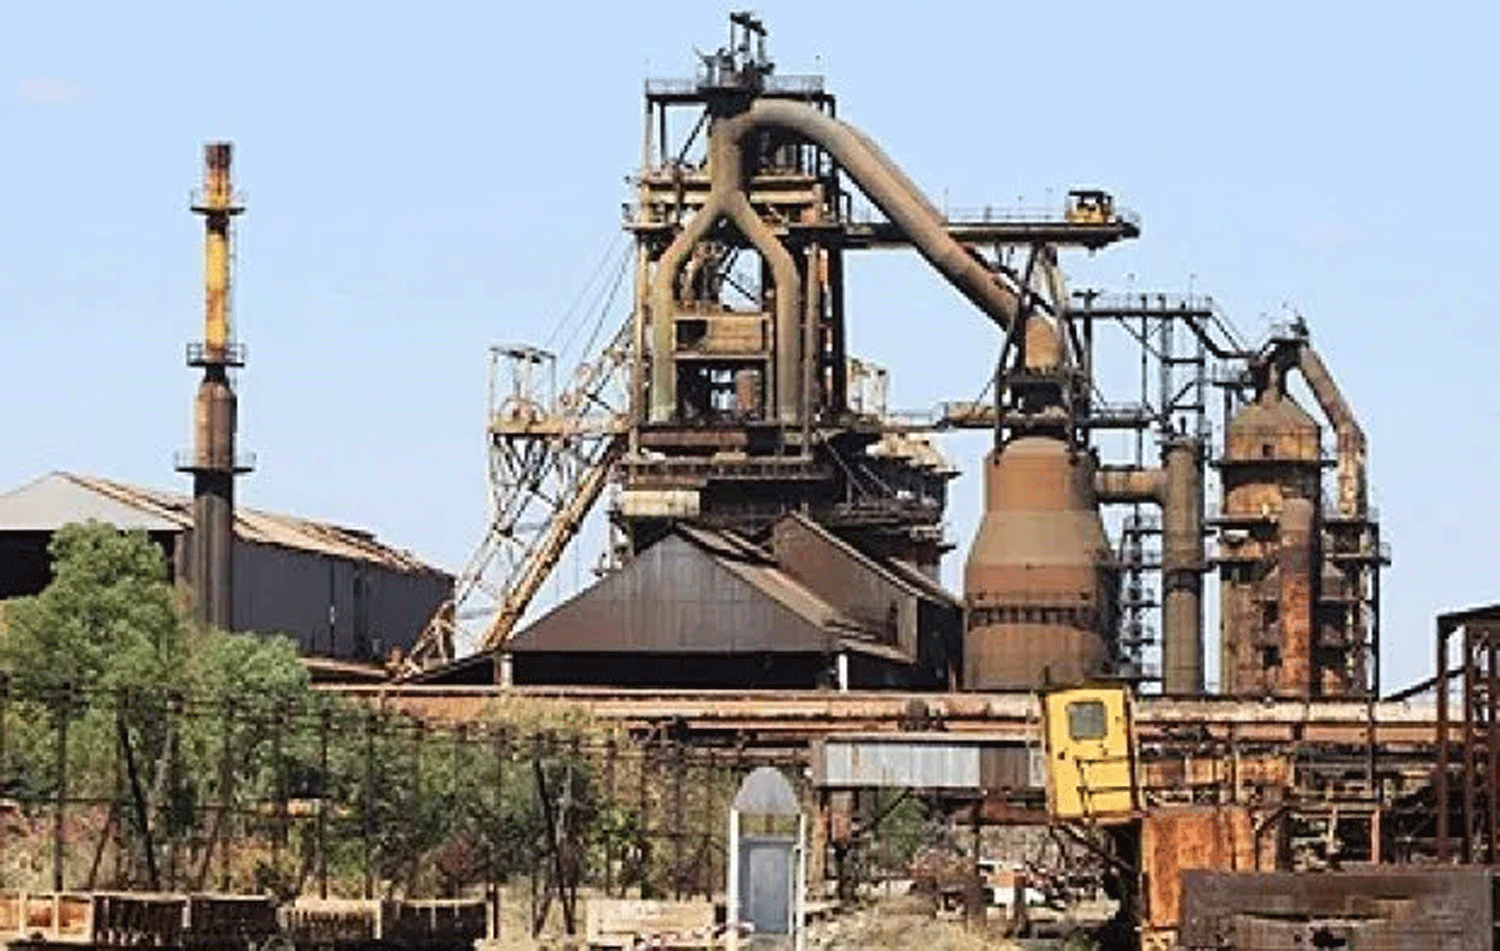 FG secures $1.46bn to fund completion of Ajaokuta steel